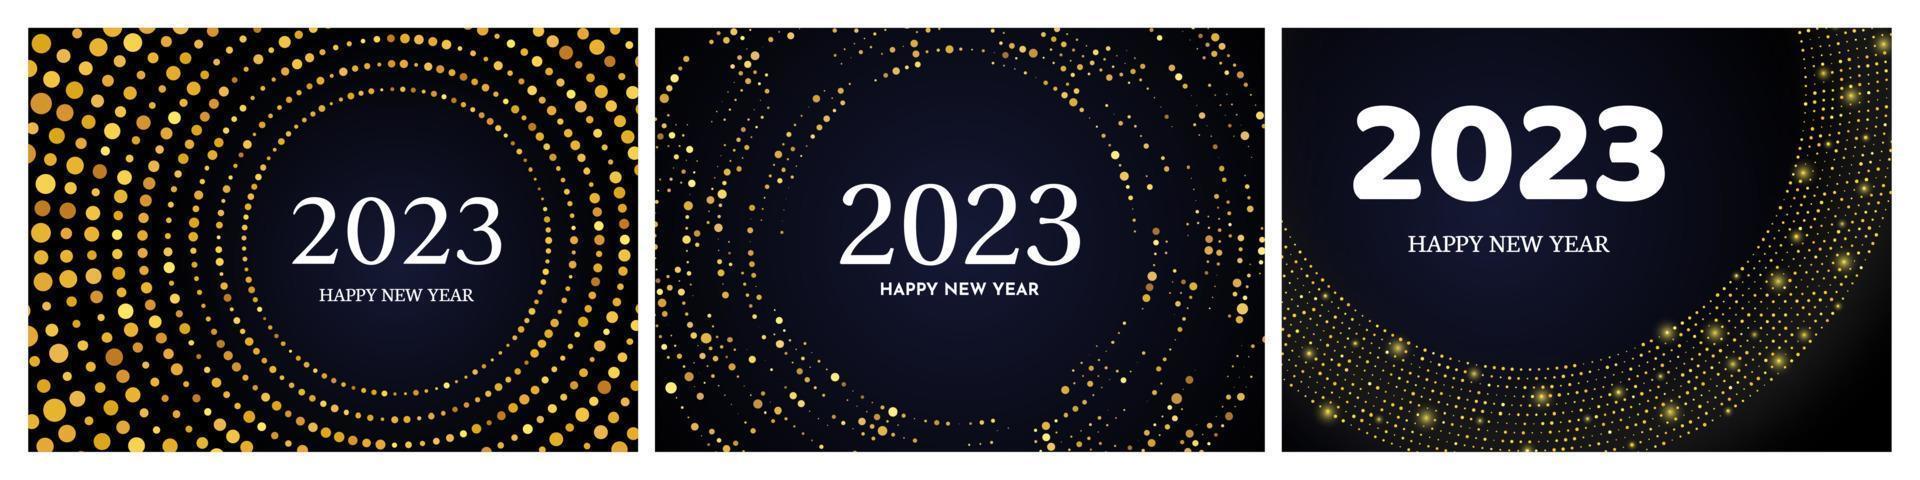 2023 Happy New Year of gold glitter pattern vector